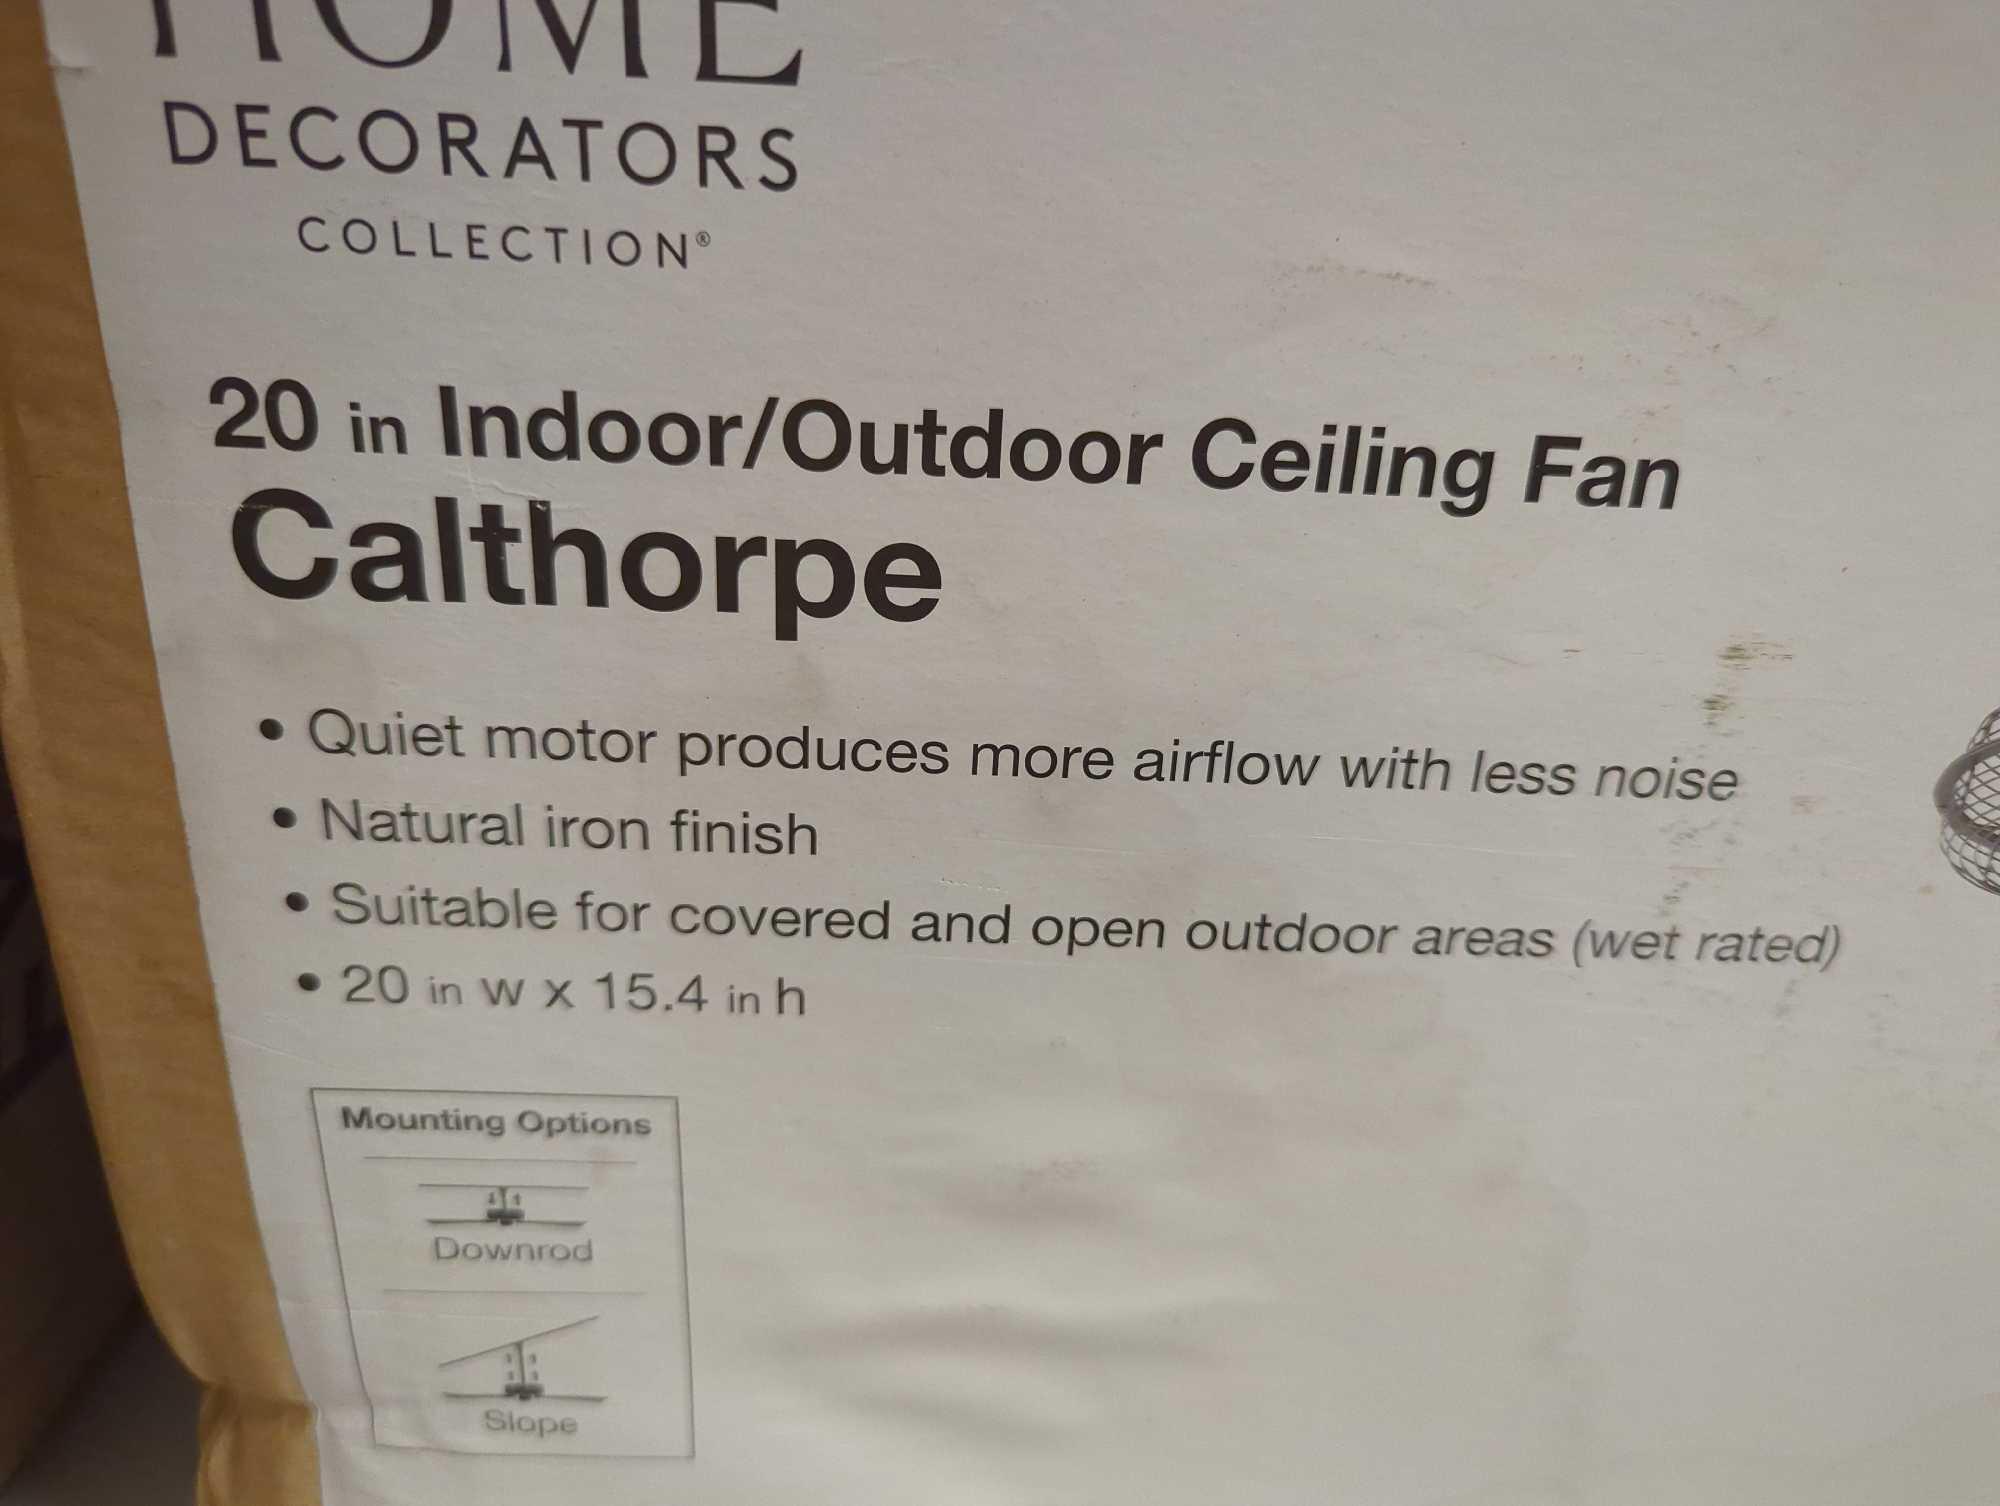 Home Decorators Collection Calthorpe 20 in. Indoor/Outdoor Wet Rated Portable Natural Iron Ceiling